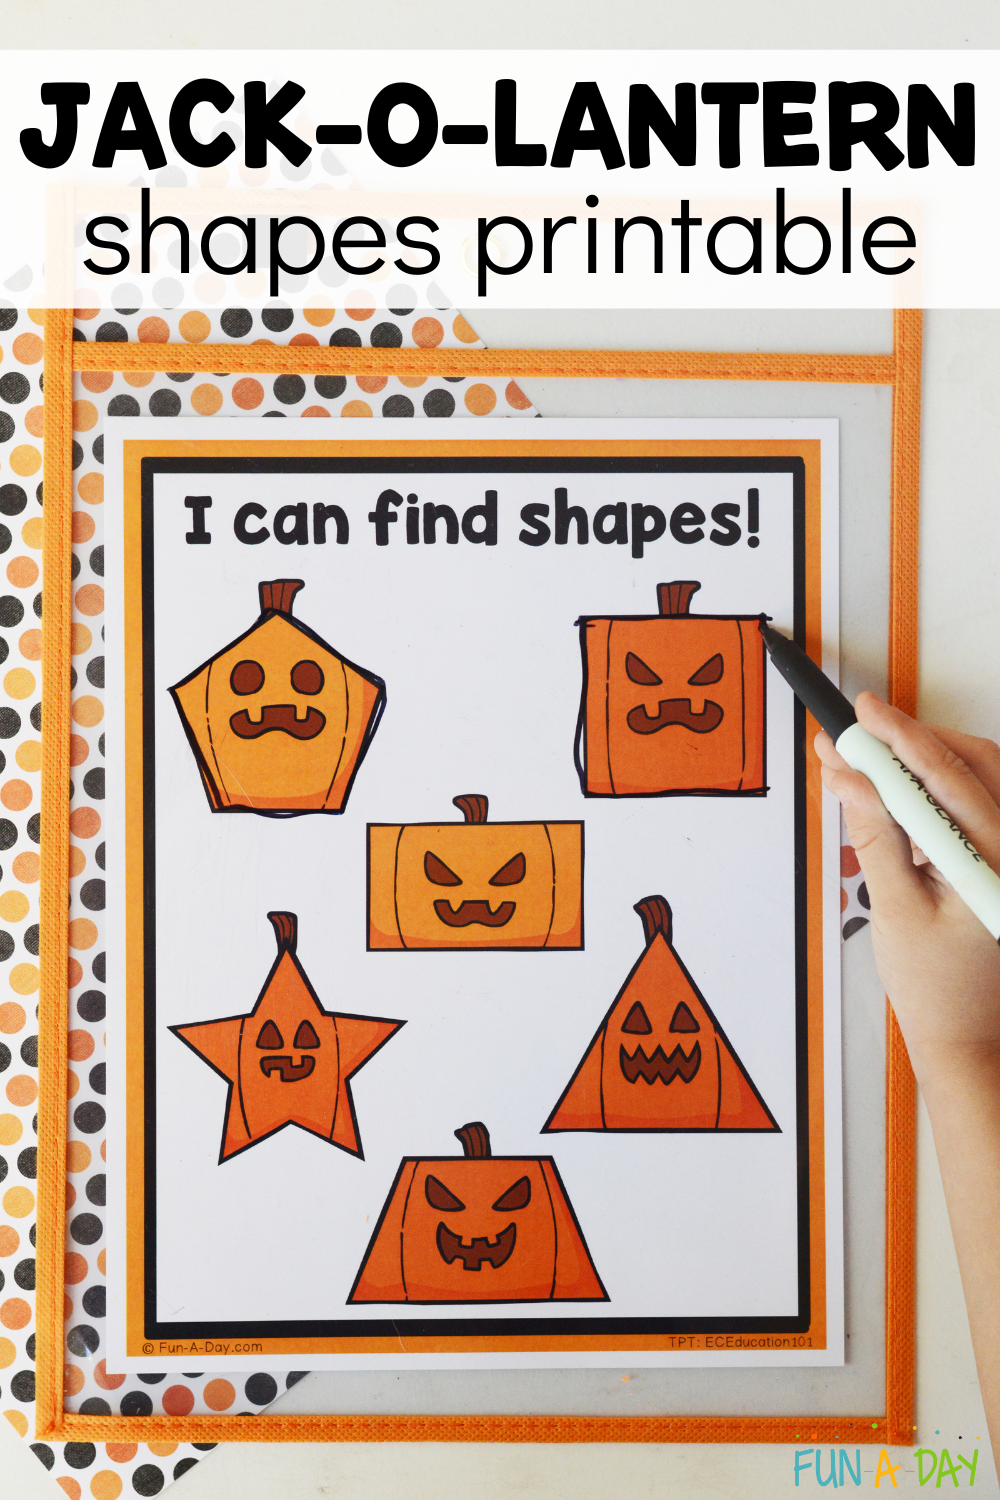 child using dry erase marker on shape mat with text that reads jack-o-lantern shapes printable